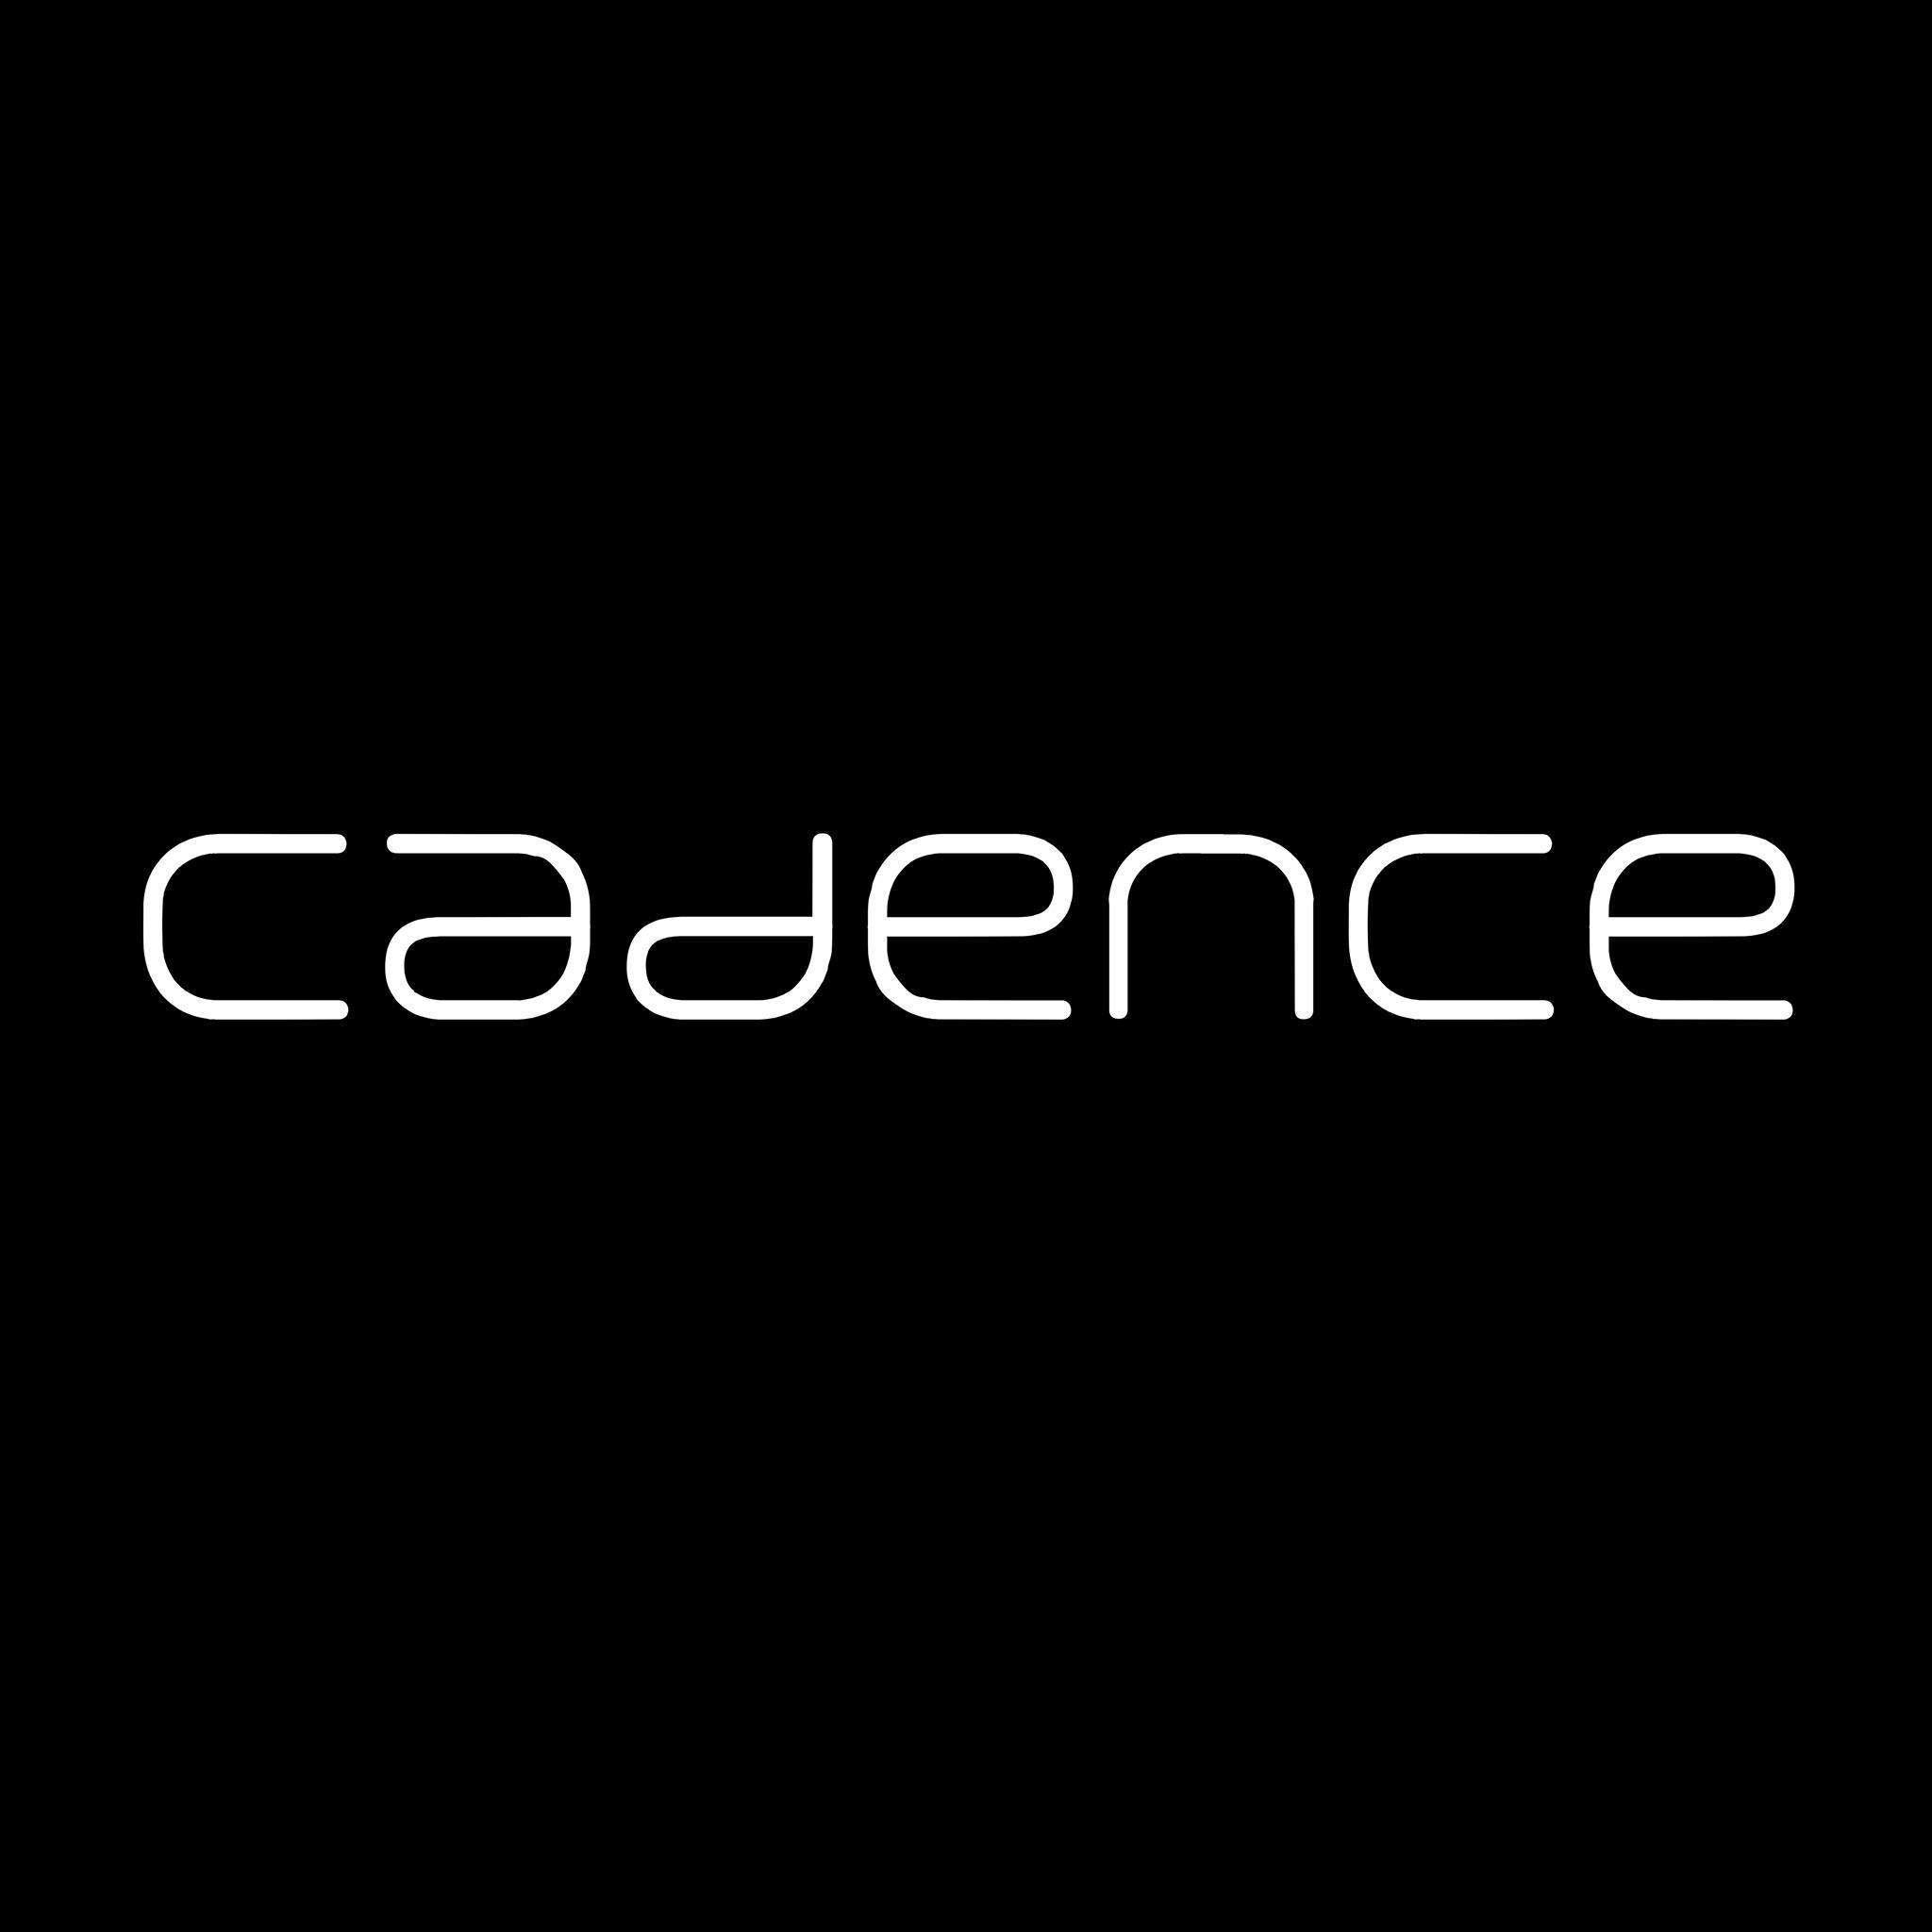 Cadence Architects|Accounting Services|Professional Services